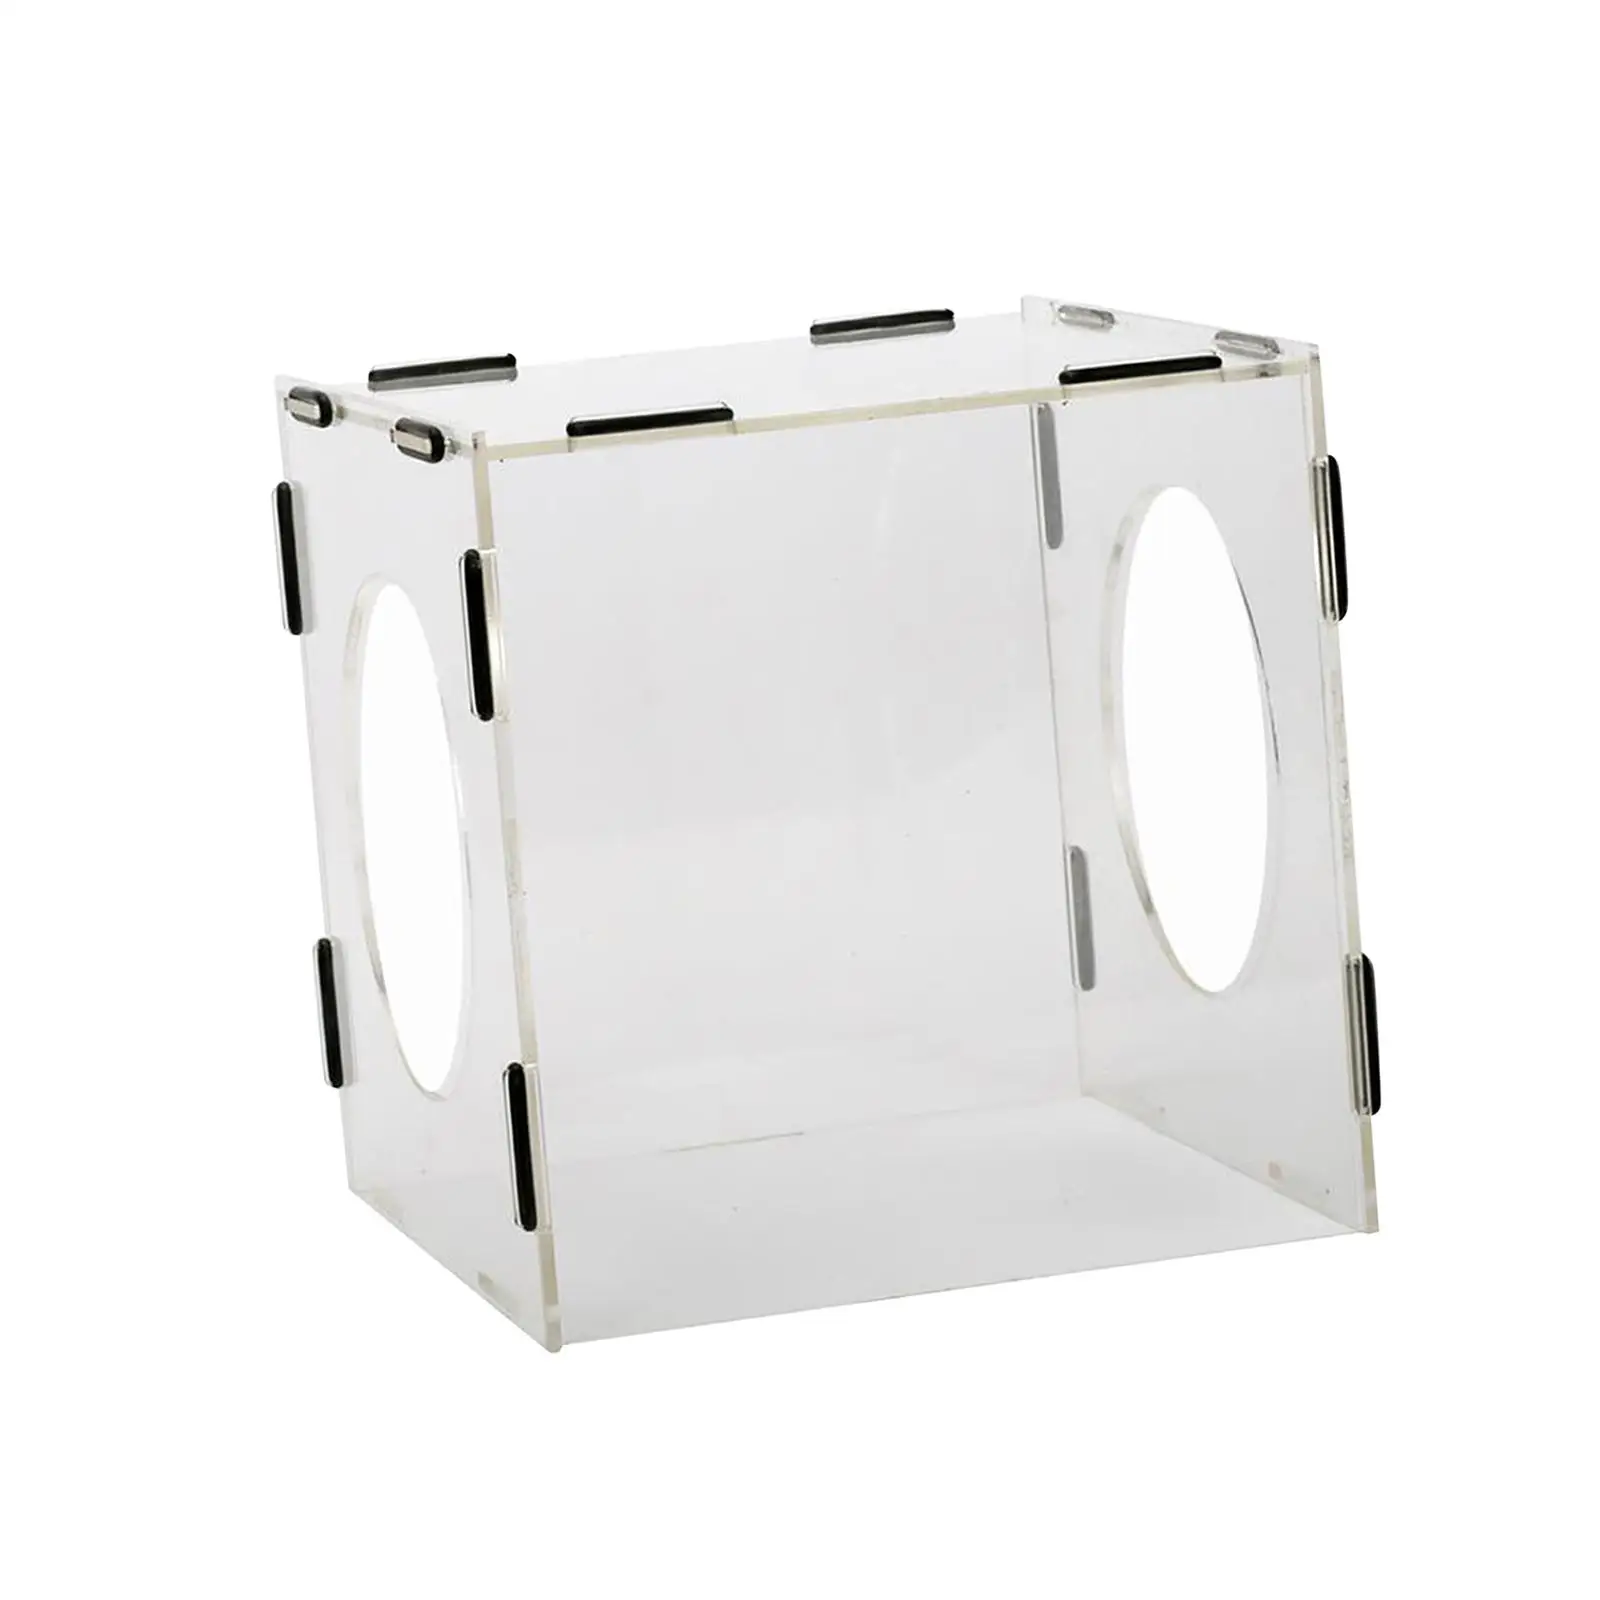 Enclosed Grinding Dust Box Cover Acrylic Clear with 2 Holes Portable Dustproof Dust Cage Dust Hood for Polishing Buffing